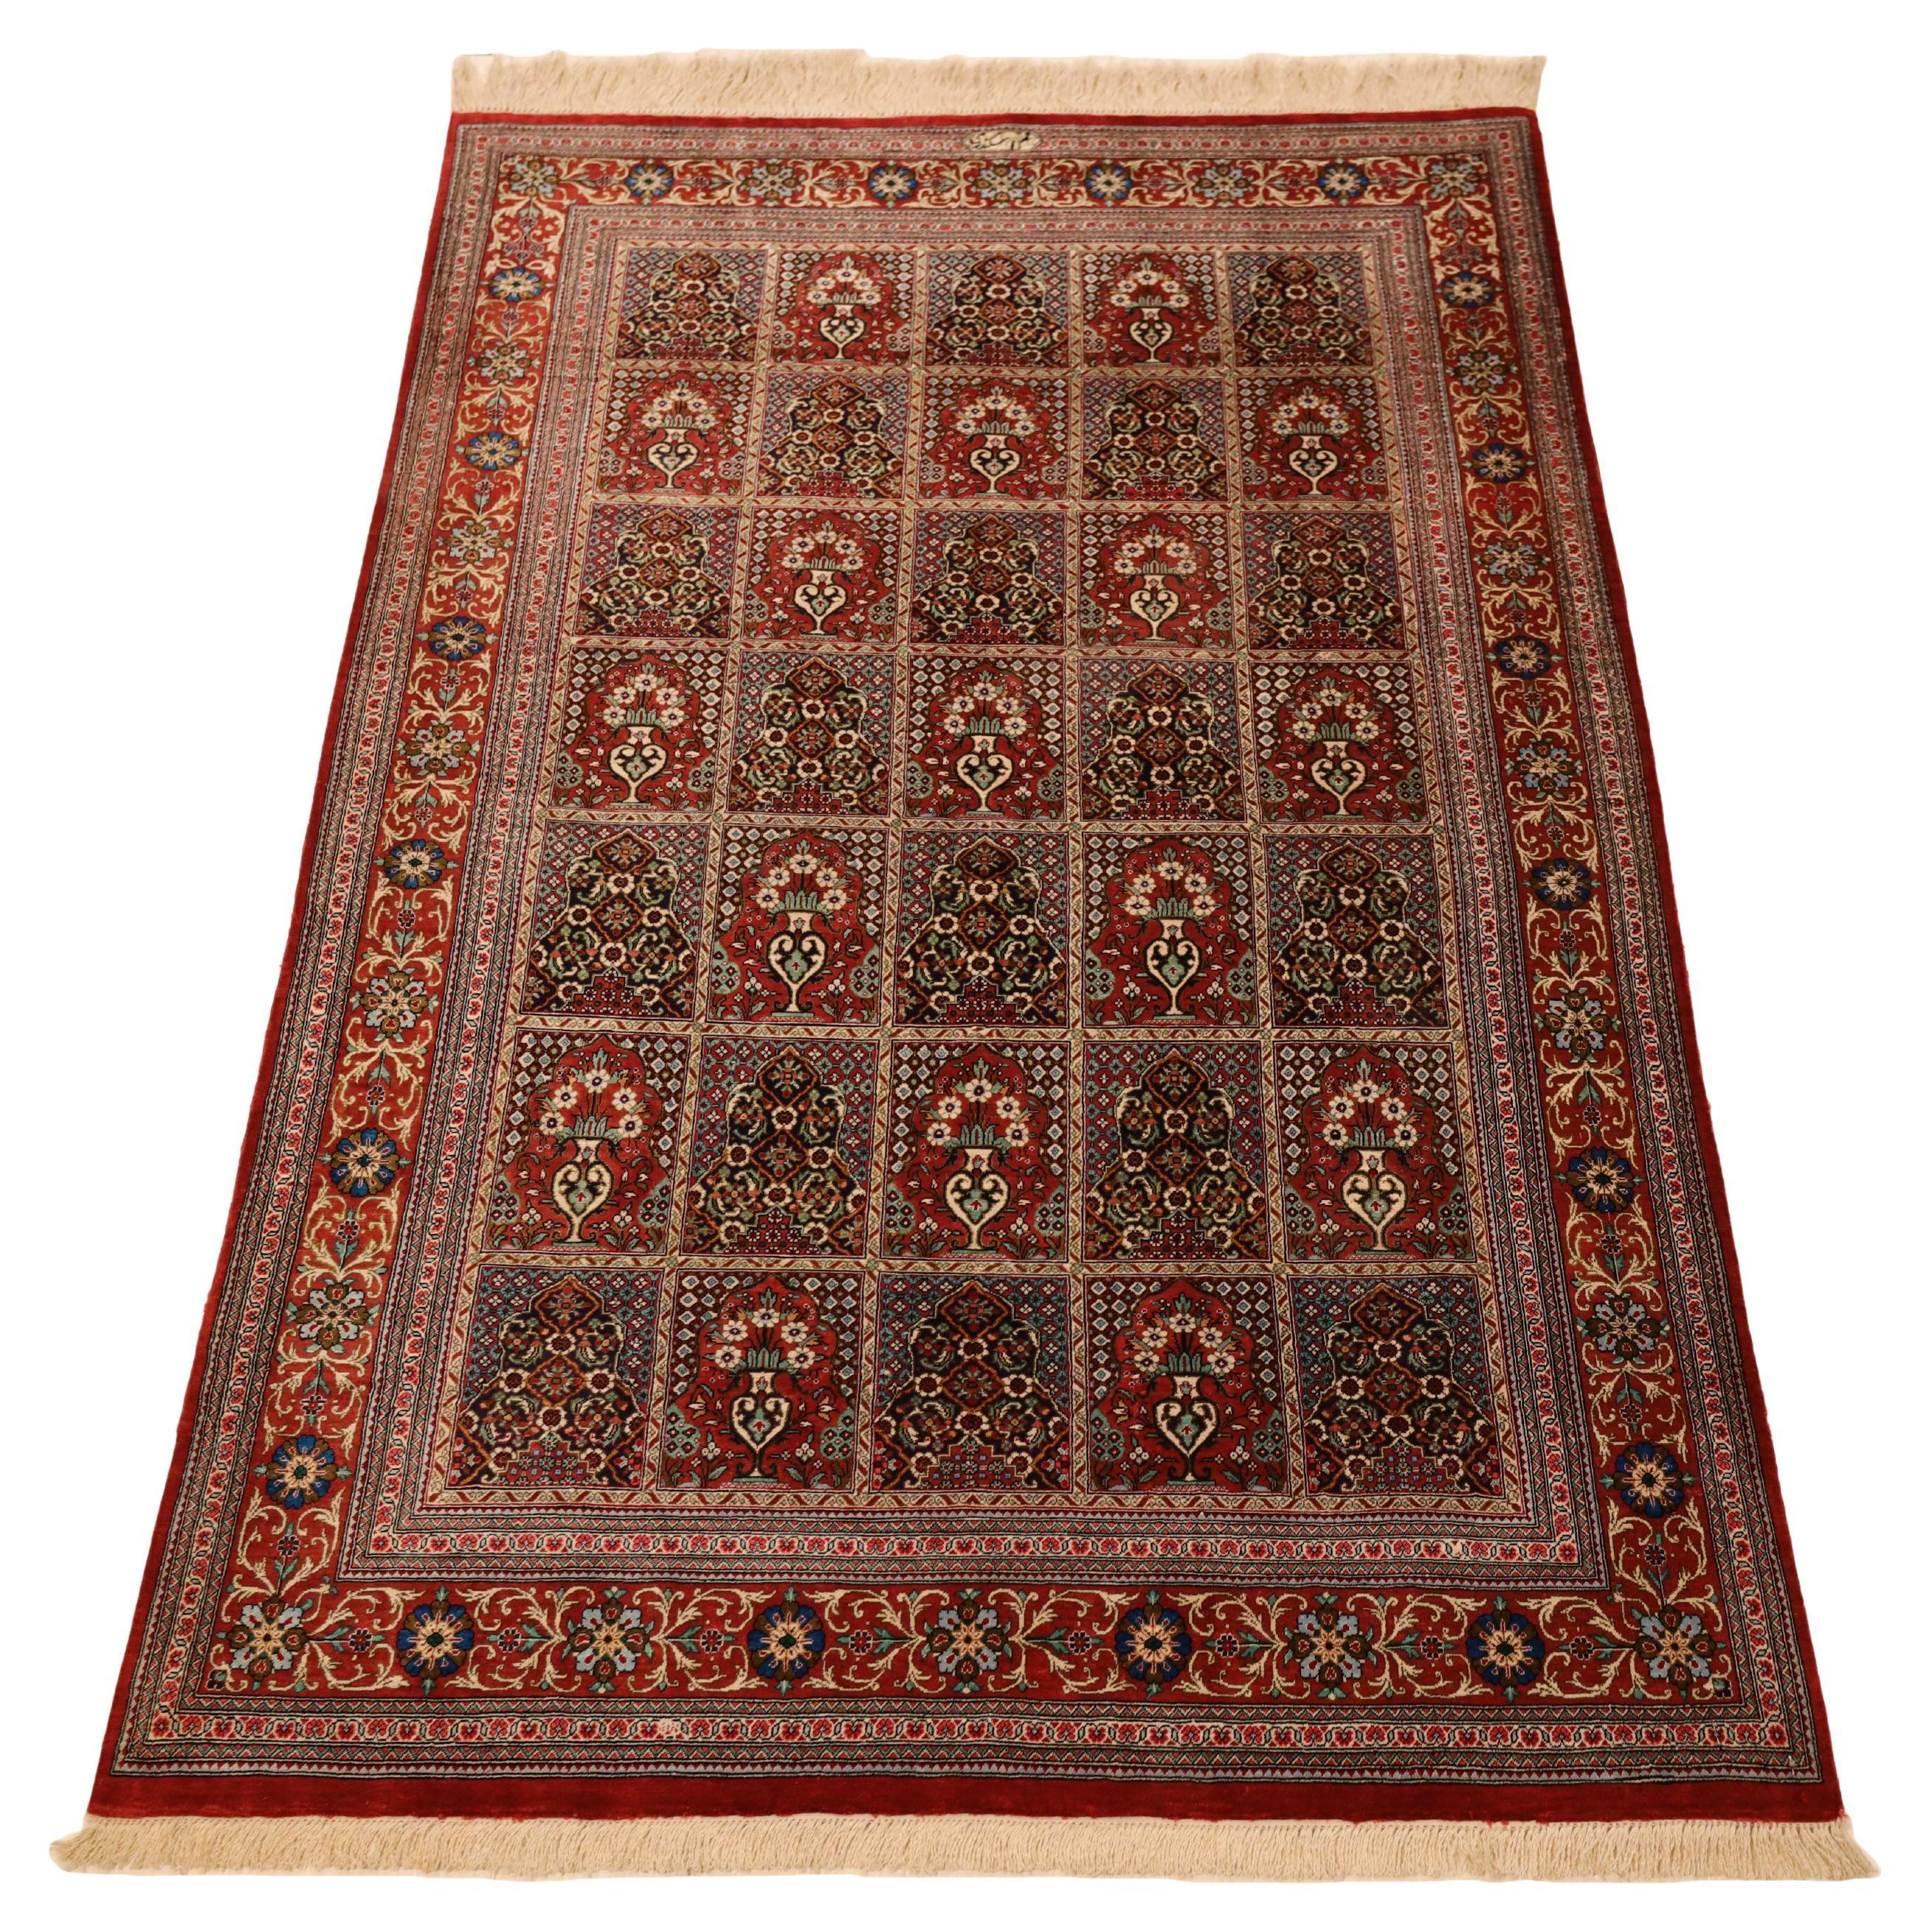 How can I tell how old a Persian rug is?